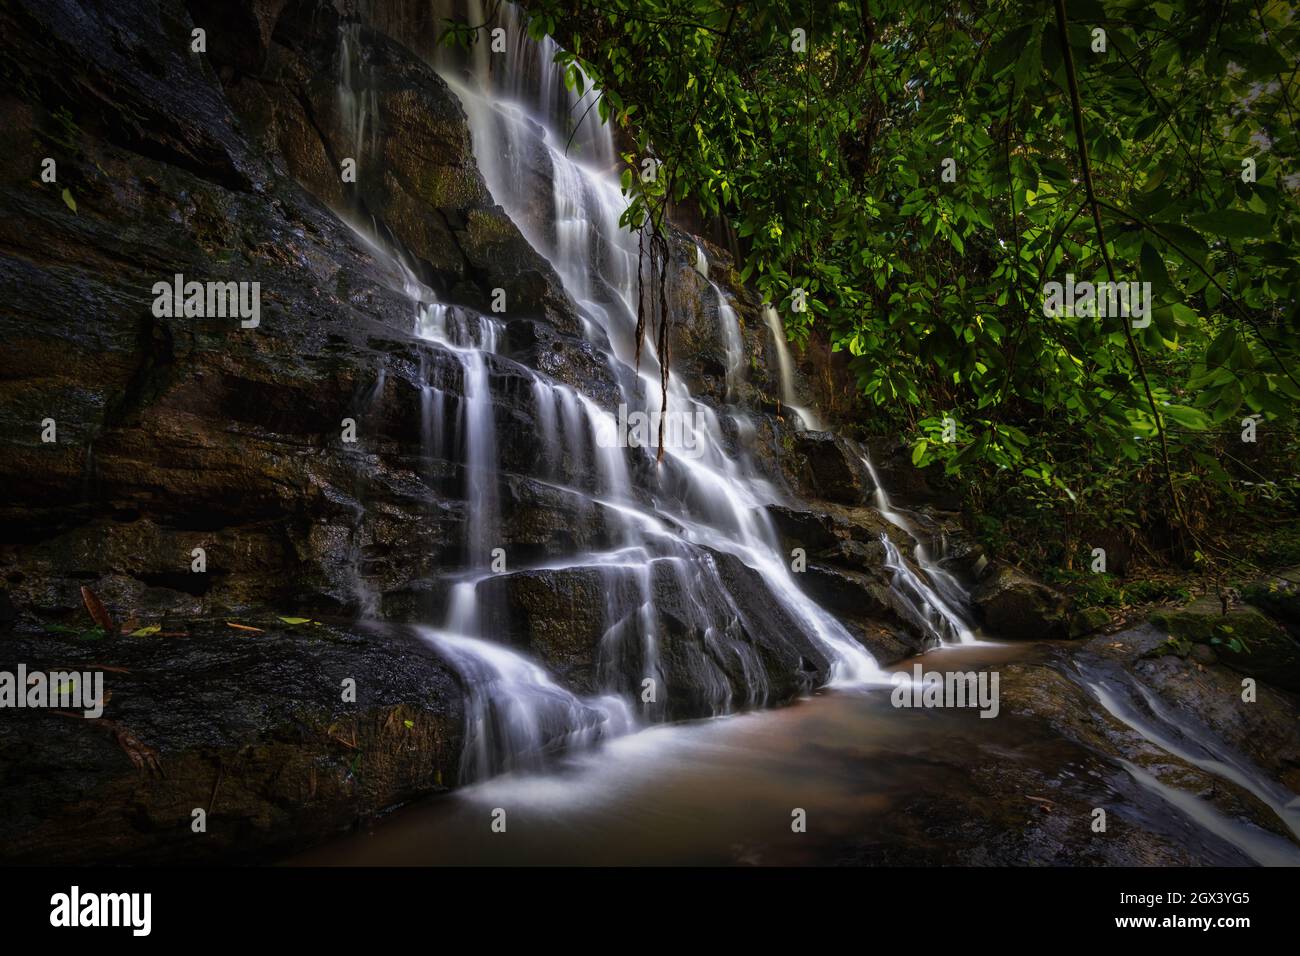 Hidden Waterfall In Forest Stock Photo